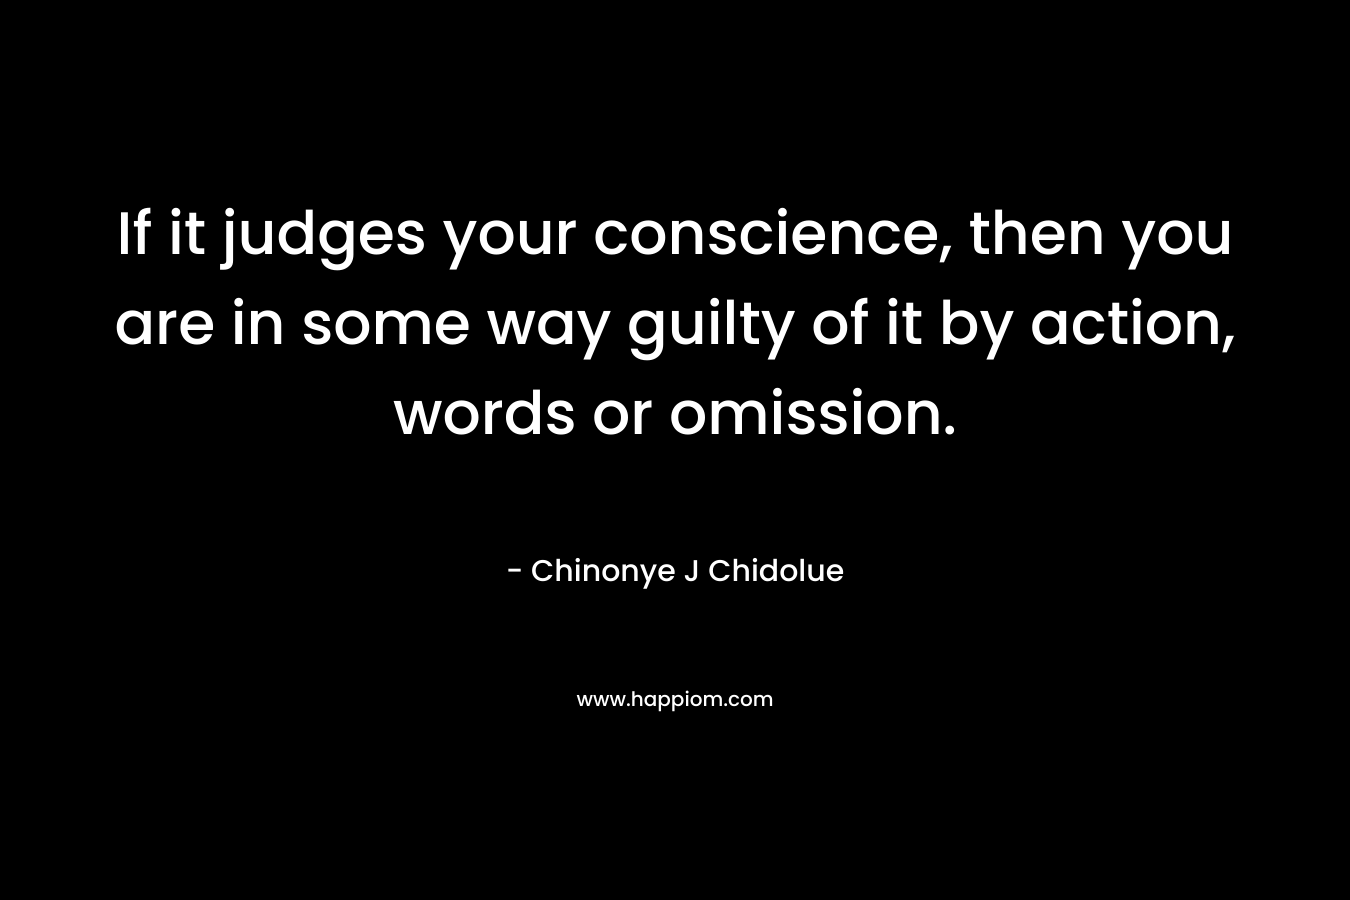 If it judges your conscience, then you are in some way guilty of it by action, words or omission.